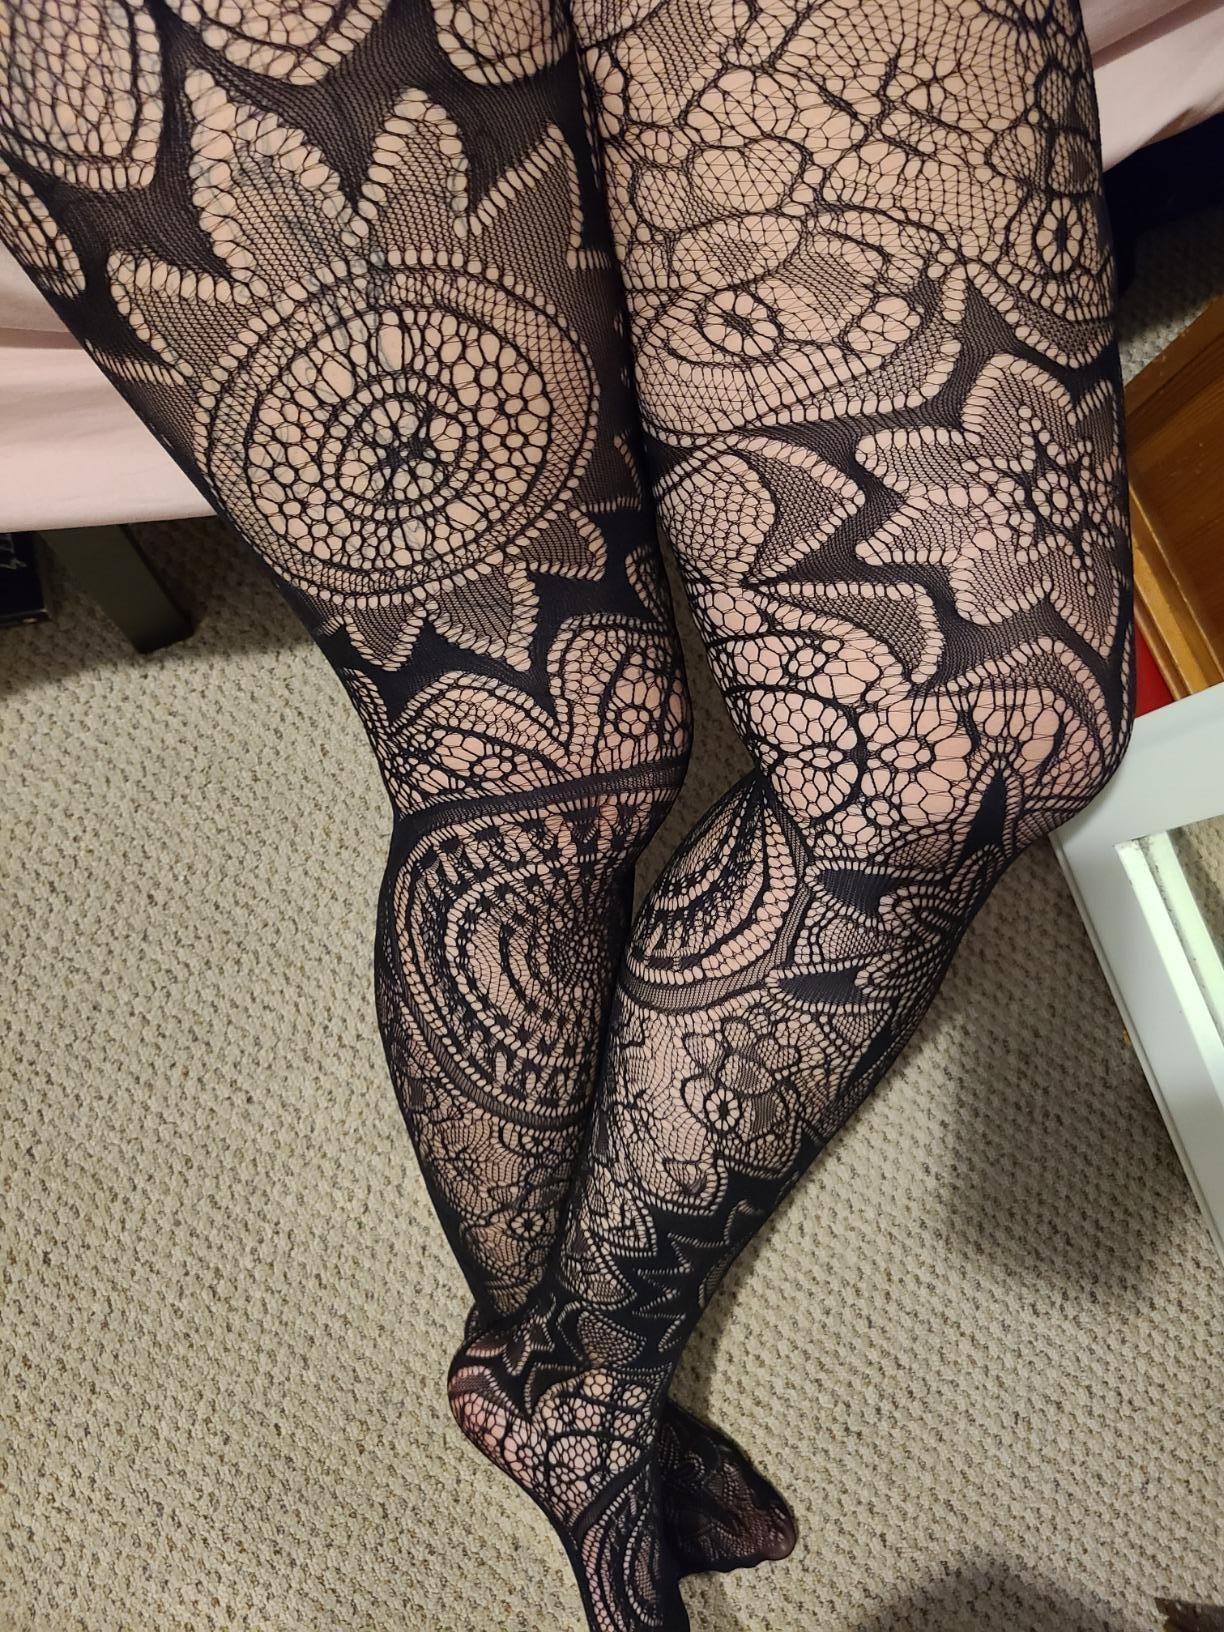 100 Best Black / Patterned tights. ideas